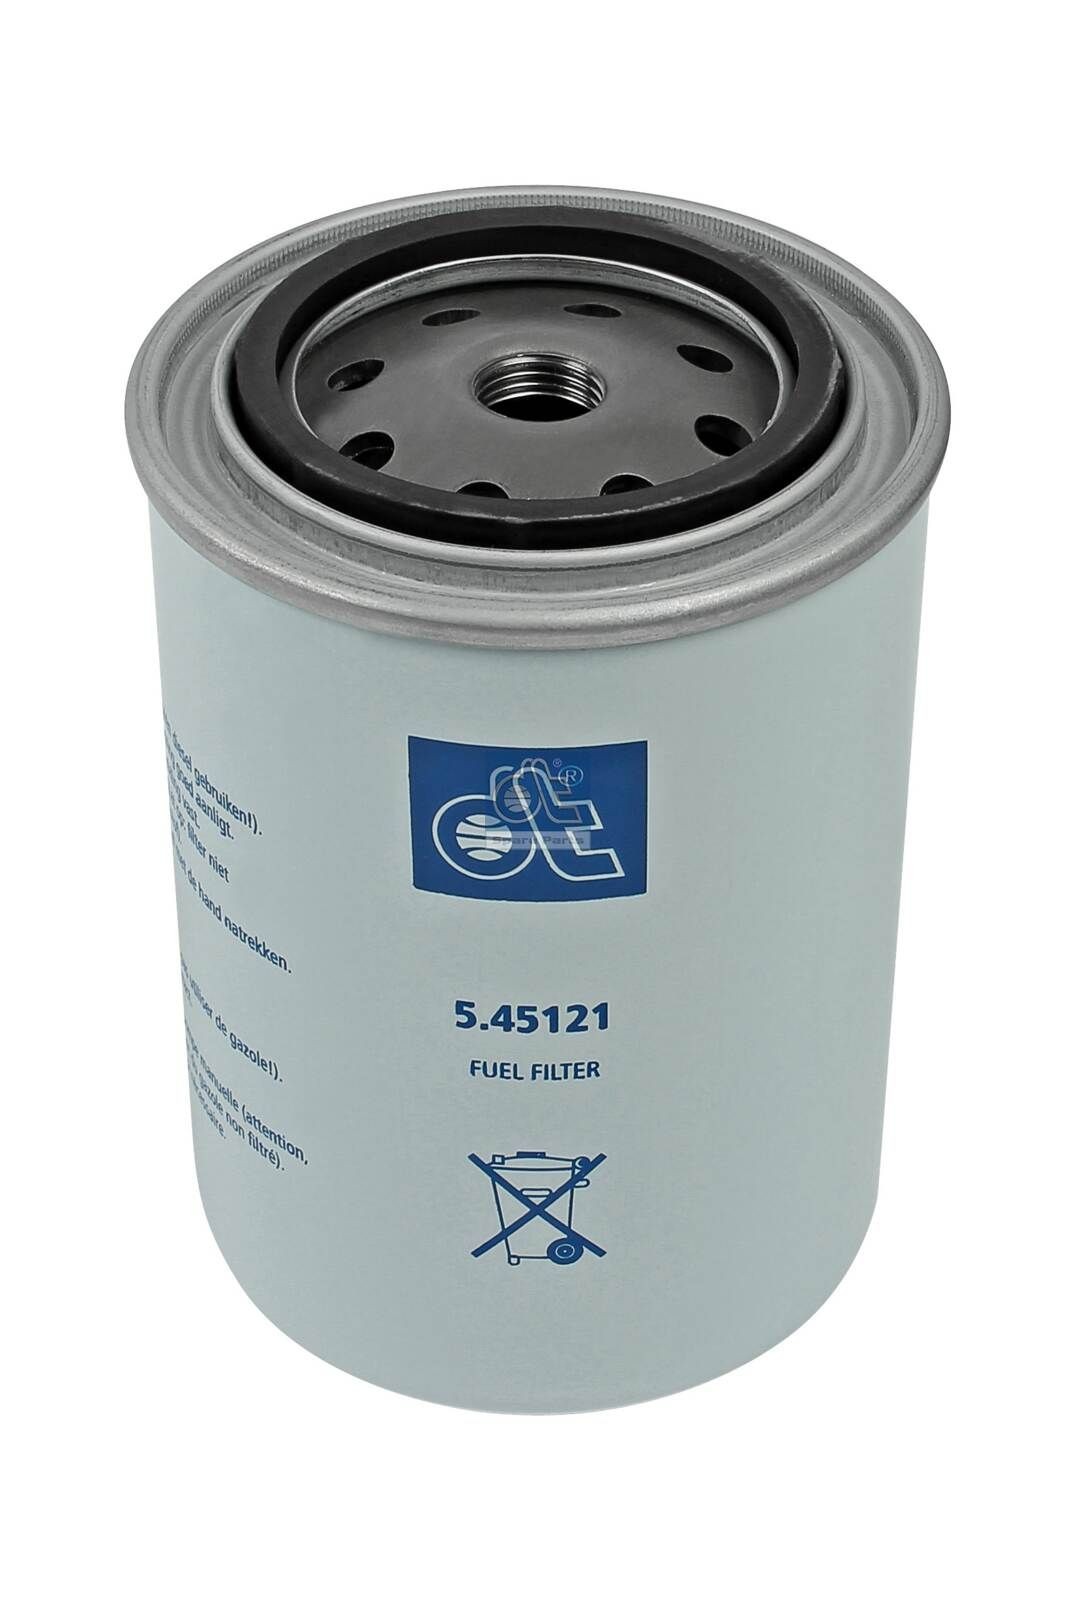 WDK 940/5 DT Spare Parts 5.45121 Fuel filter 11711074